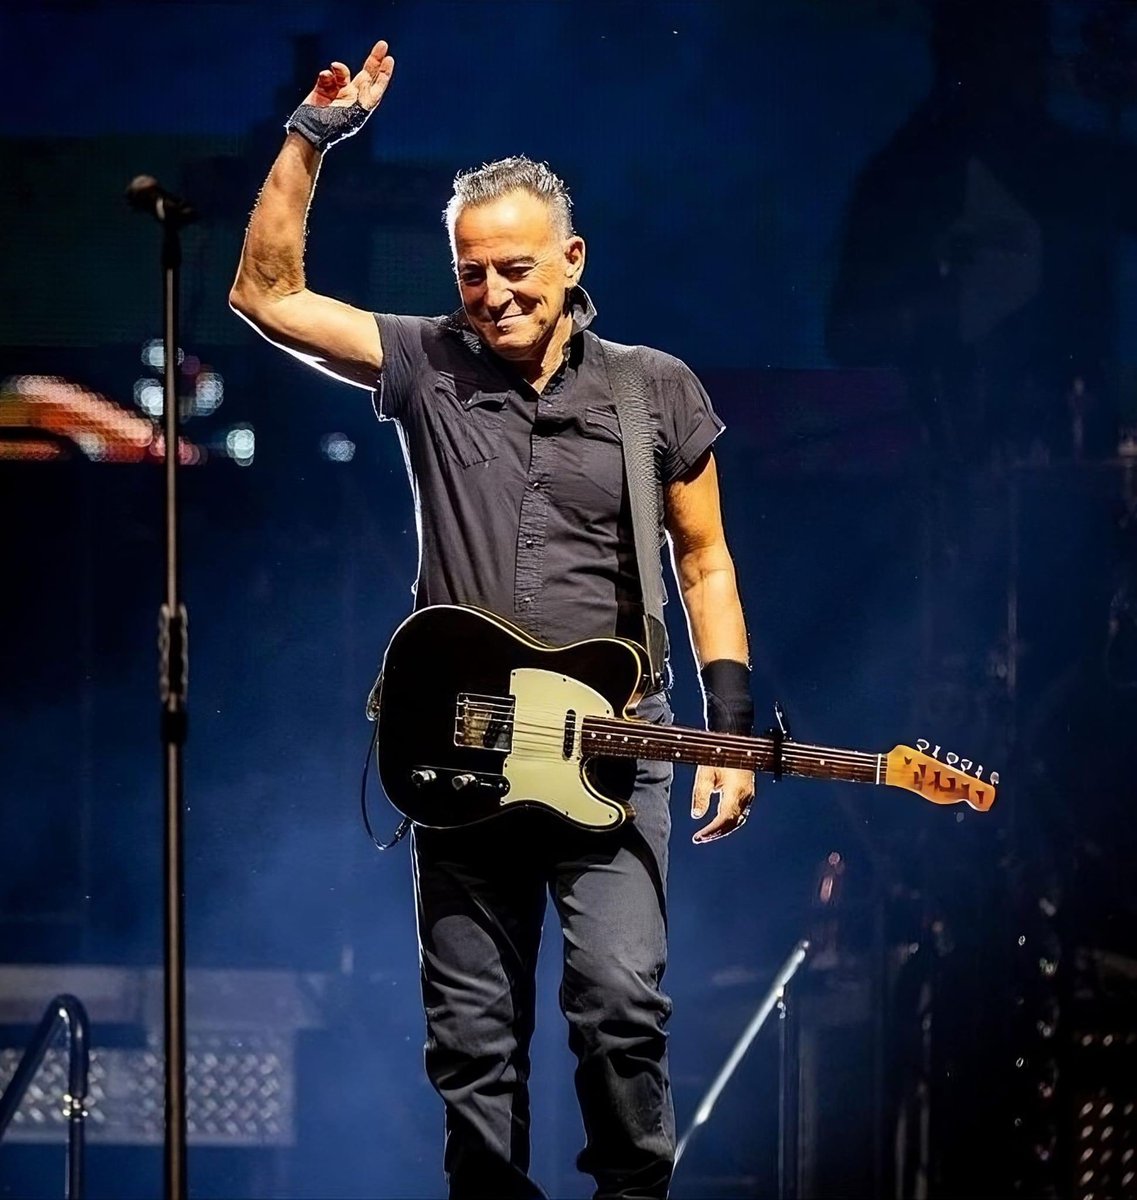 Happy Birthday to The Boss! Thank you Bruce @springsteen  for everything! Here’s to many many more years of rocking to come! Get well soon! We Love Ya! #BruceSpringsteen #EStreetBand #EStreetNation #SpringNuts #HappyBirthday